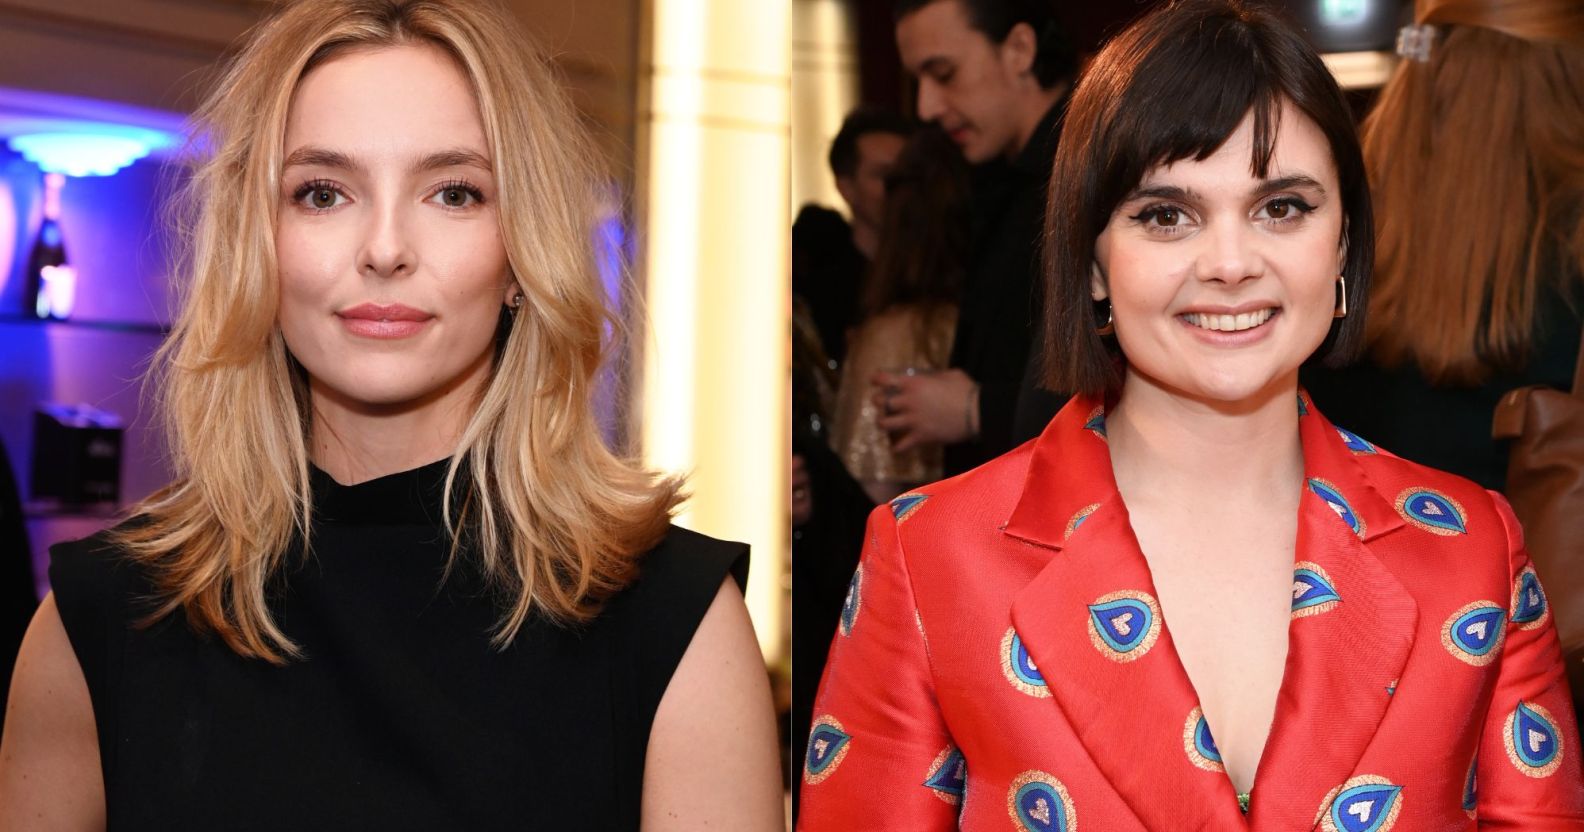 Side by side photos of Jodie Comer and Gwyneth Keyworth at the WhatsOnStage Awards.